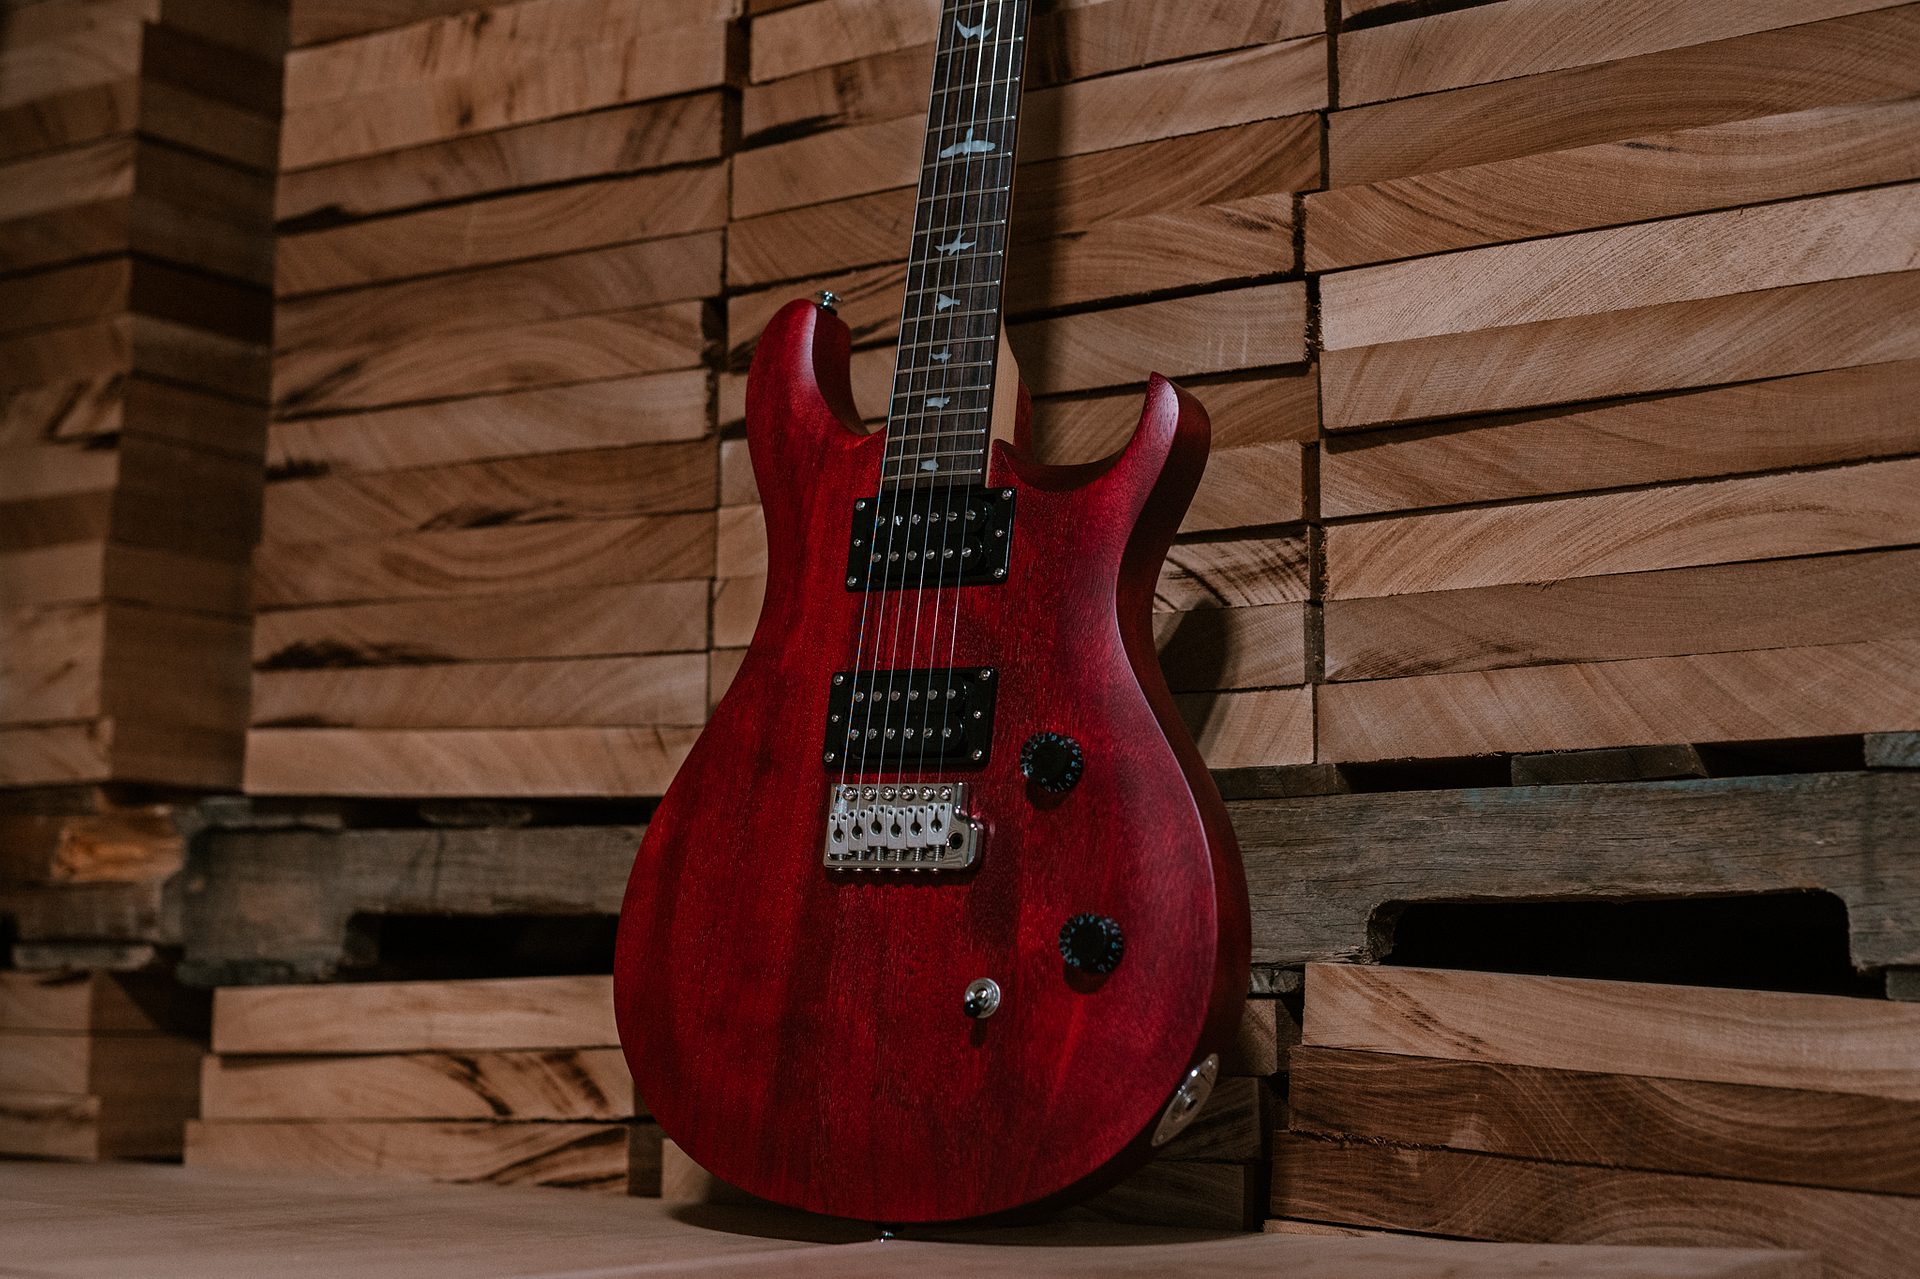 Meet our Most Affordable Model: The SE CE 24 Standard Satin